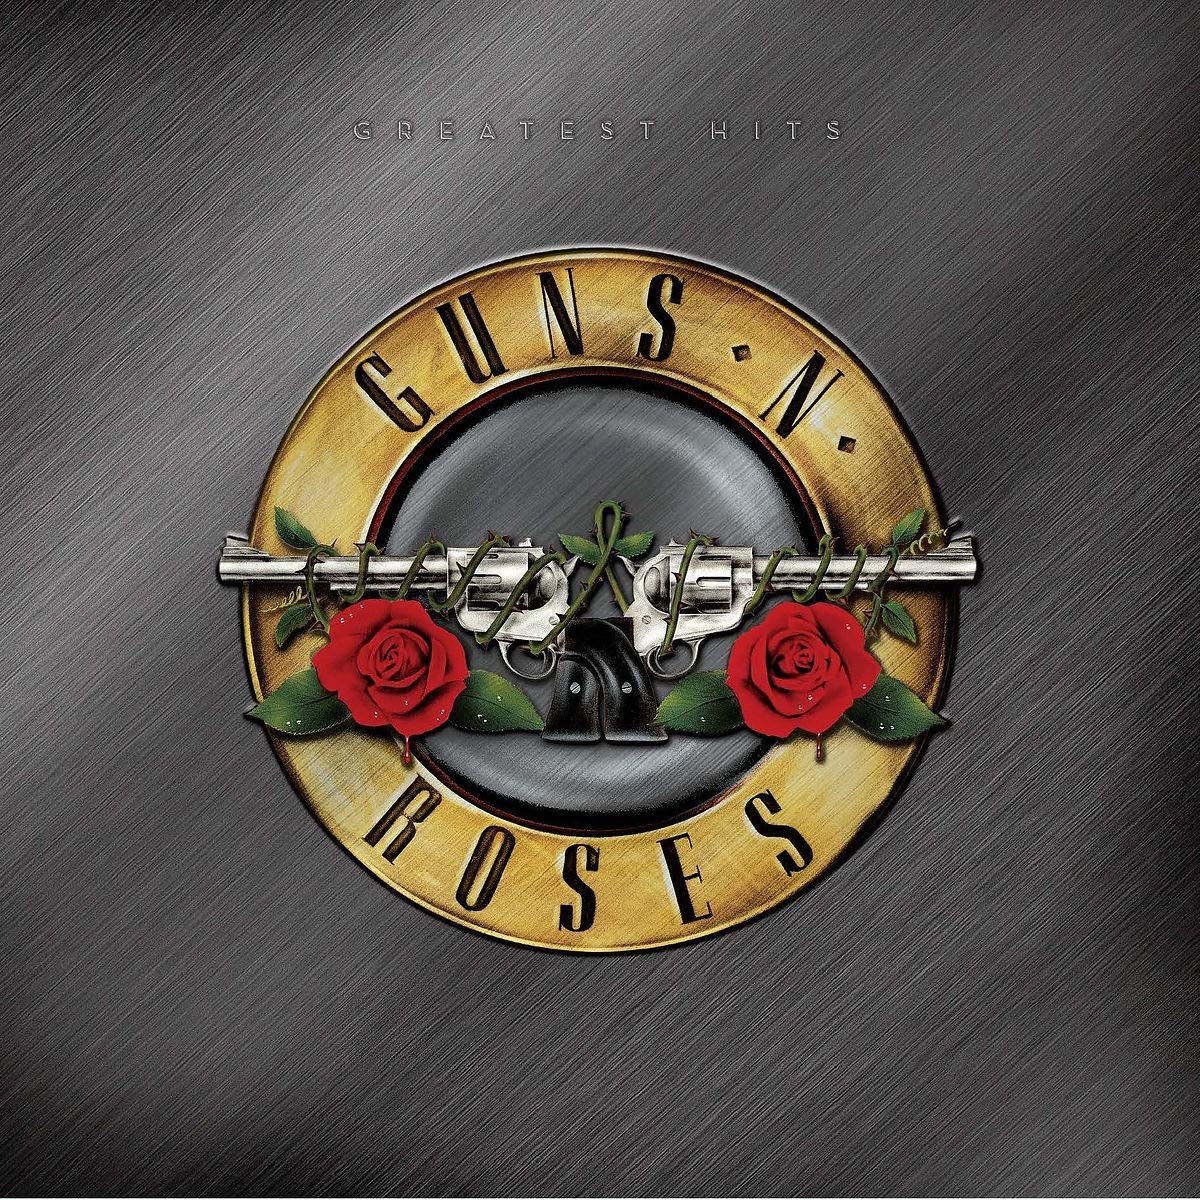 Guns and Roses Greatest Hits